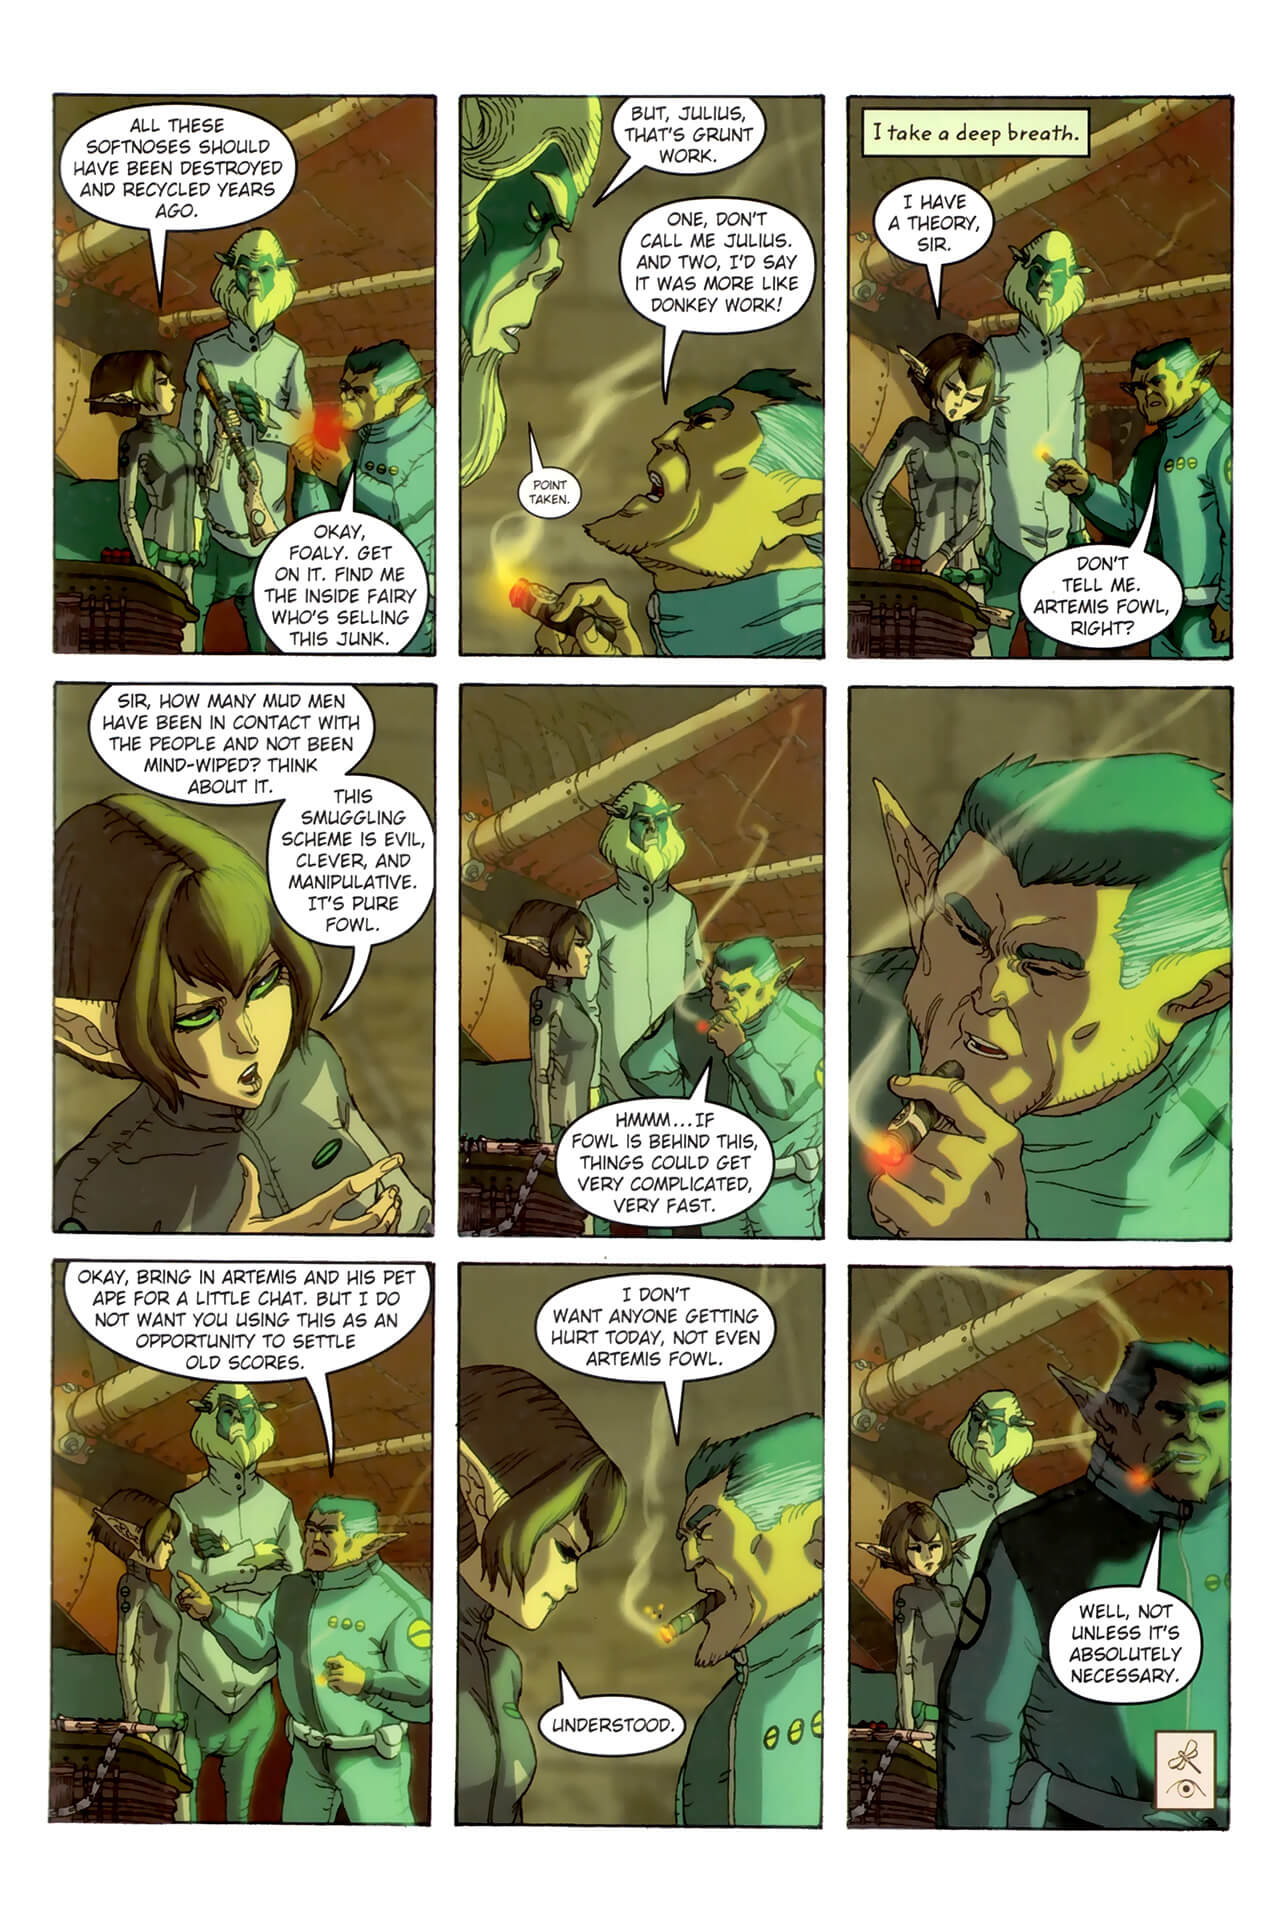 page 23 of artemis fowl the arctic incident graphic novel